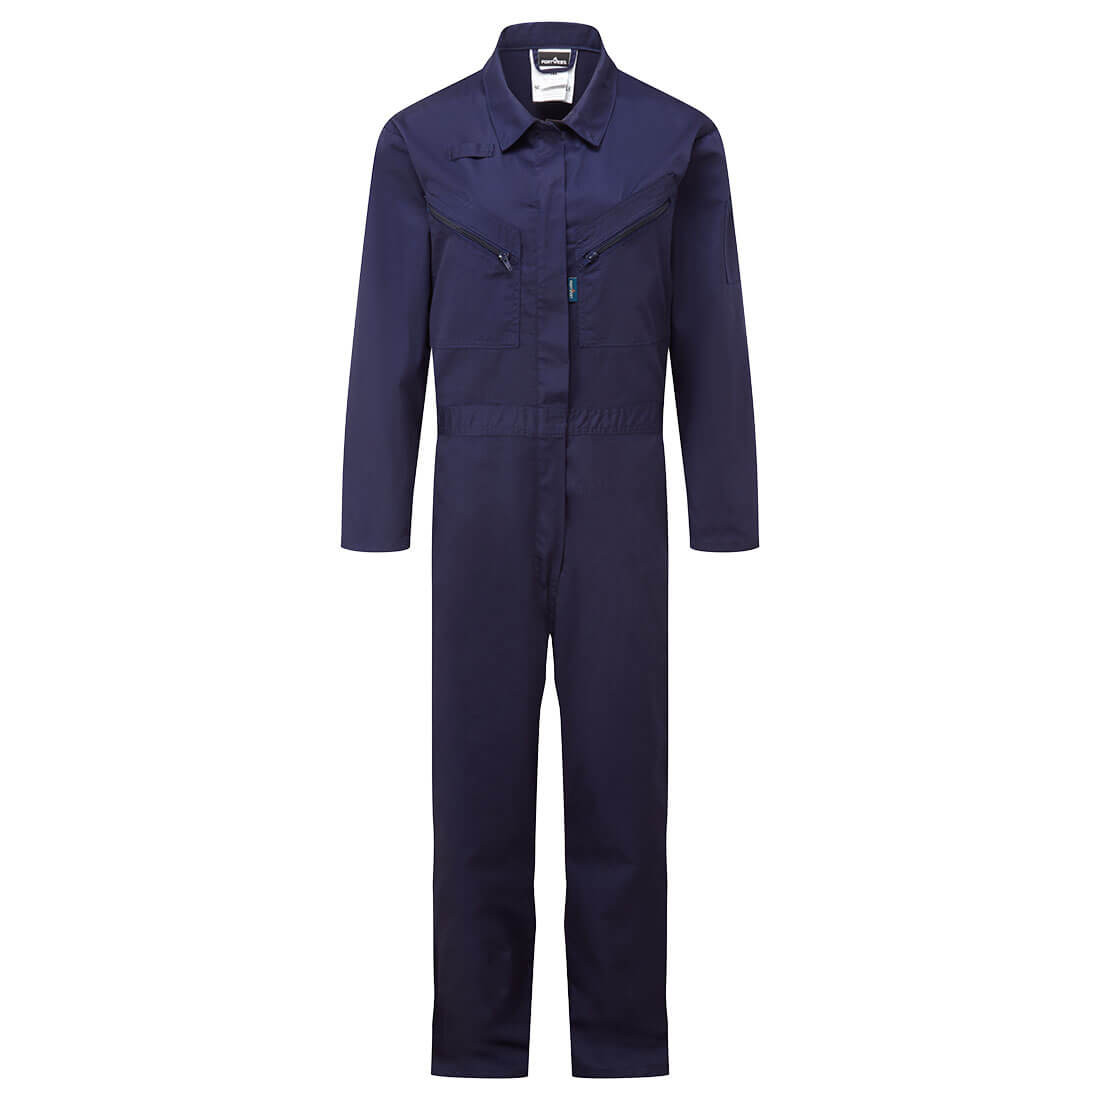 Women's Coverall - Safetywear